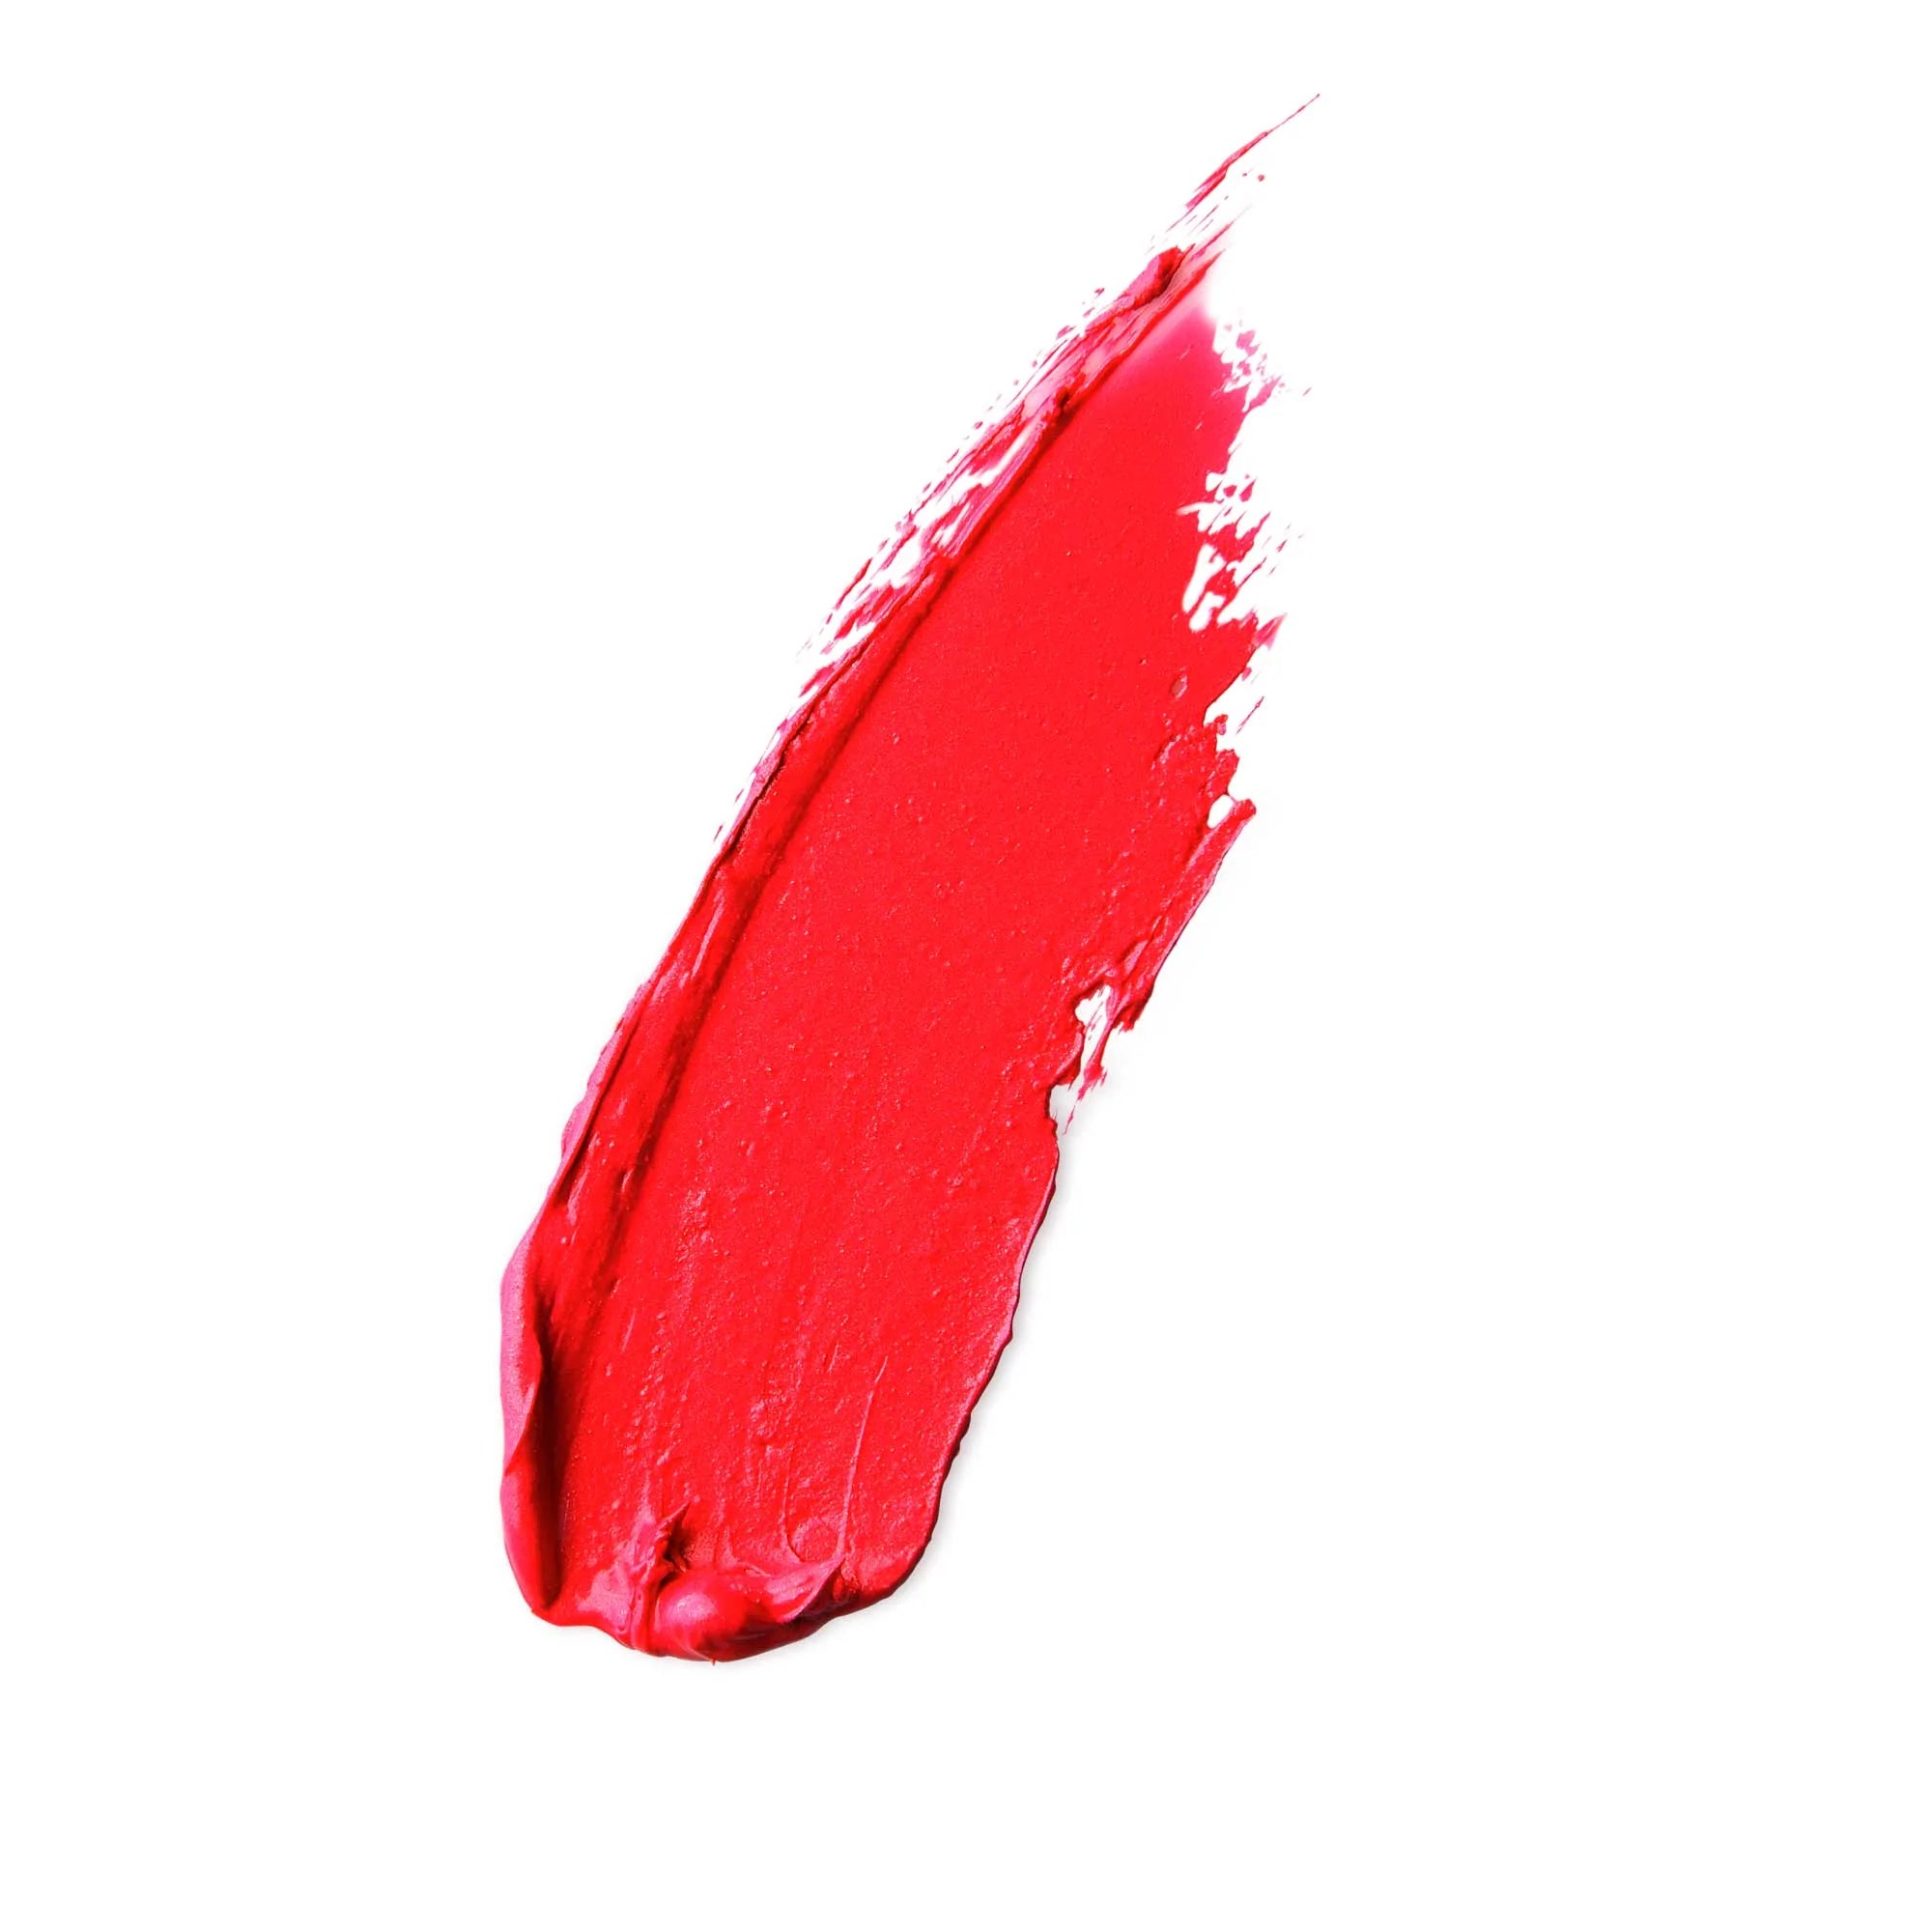 Antipodes Forest Berry Red Moisture-Boost Natural Lipstick 4g-The Living Co.